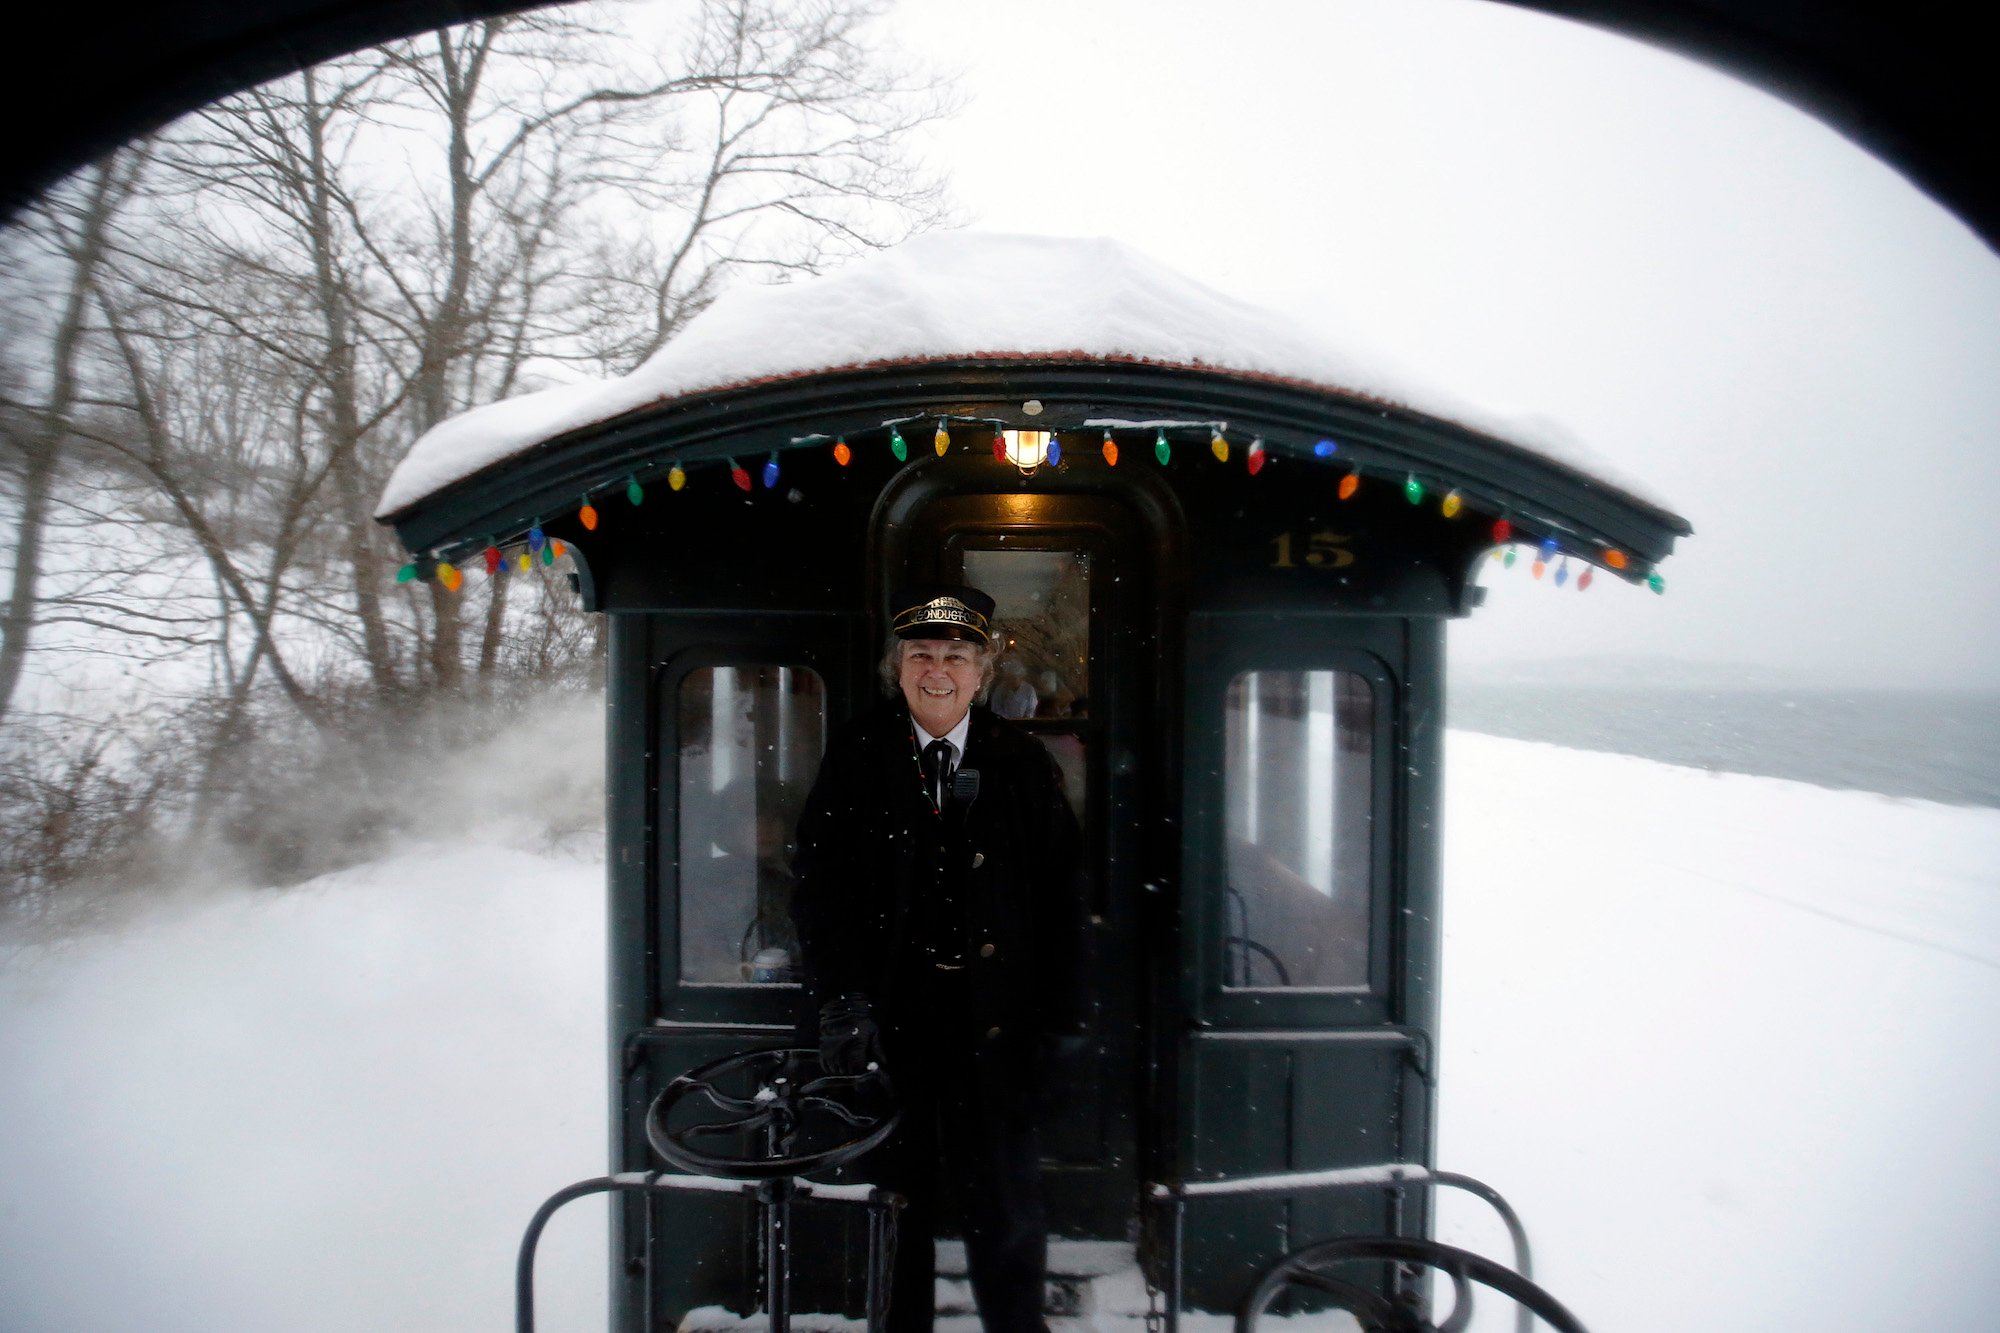 Conductor Sharon Roberts smiling on The Polar Express train, decorated with lights and covered in snow